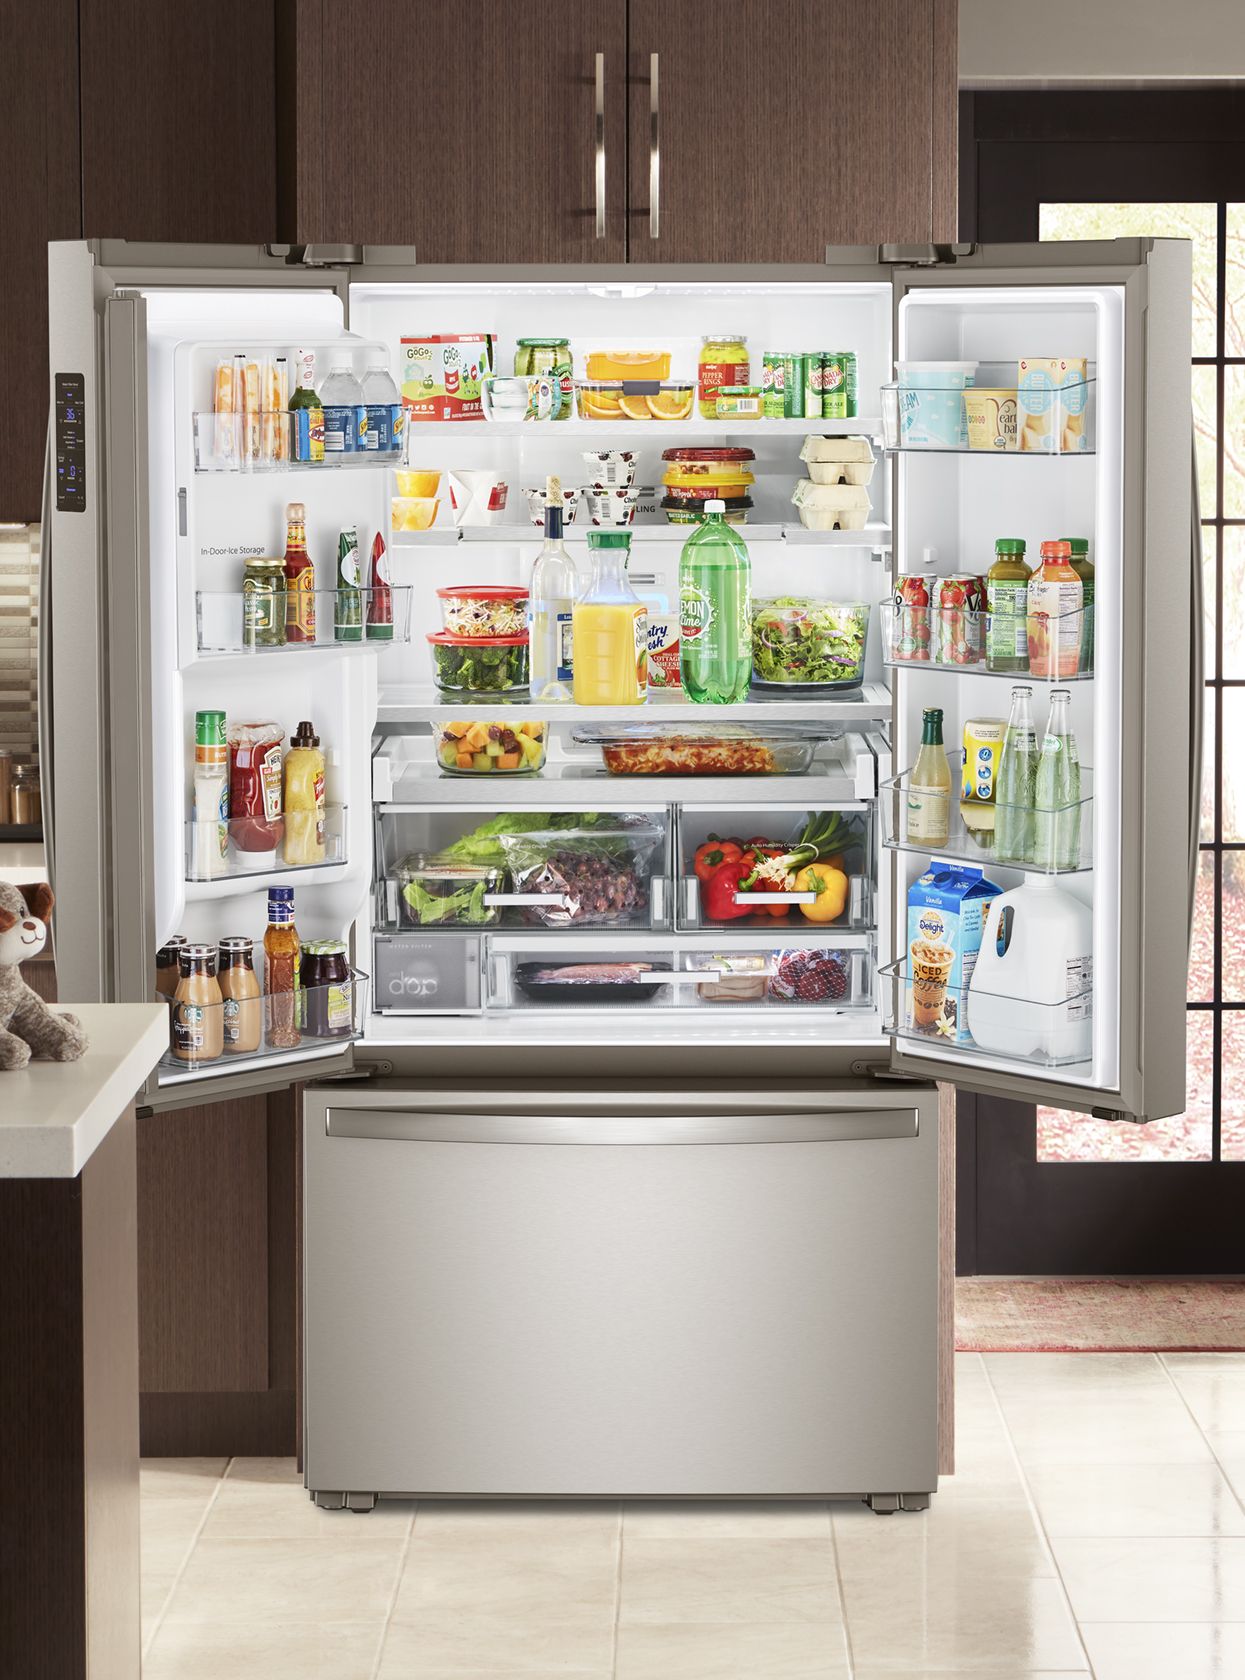 Refrigerator Options For Every Kitchen | Whirlpool